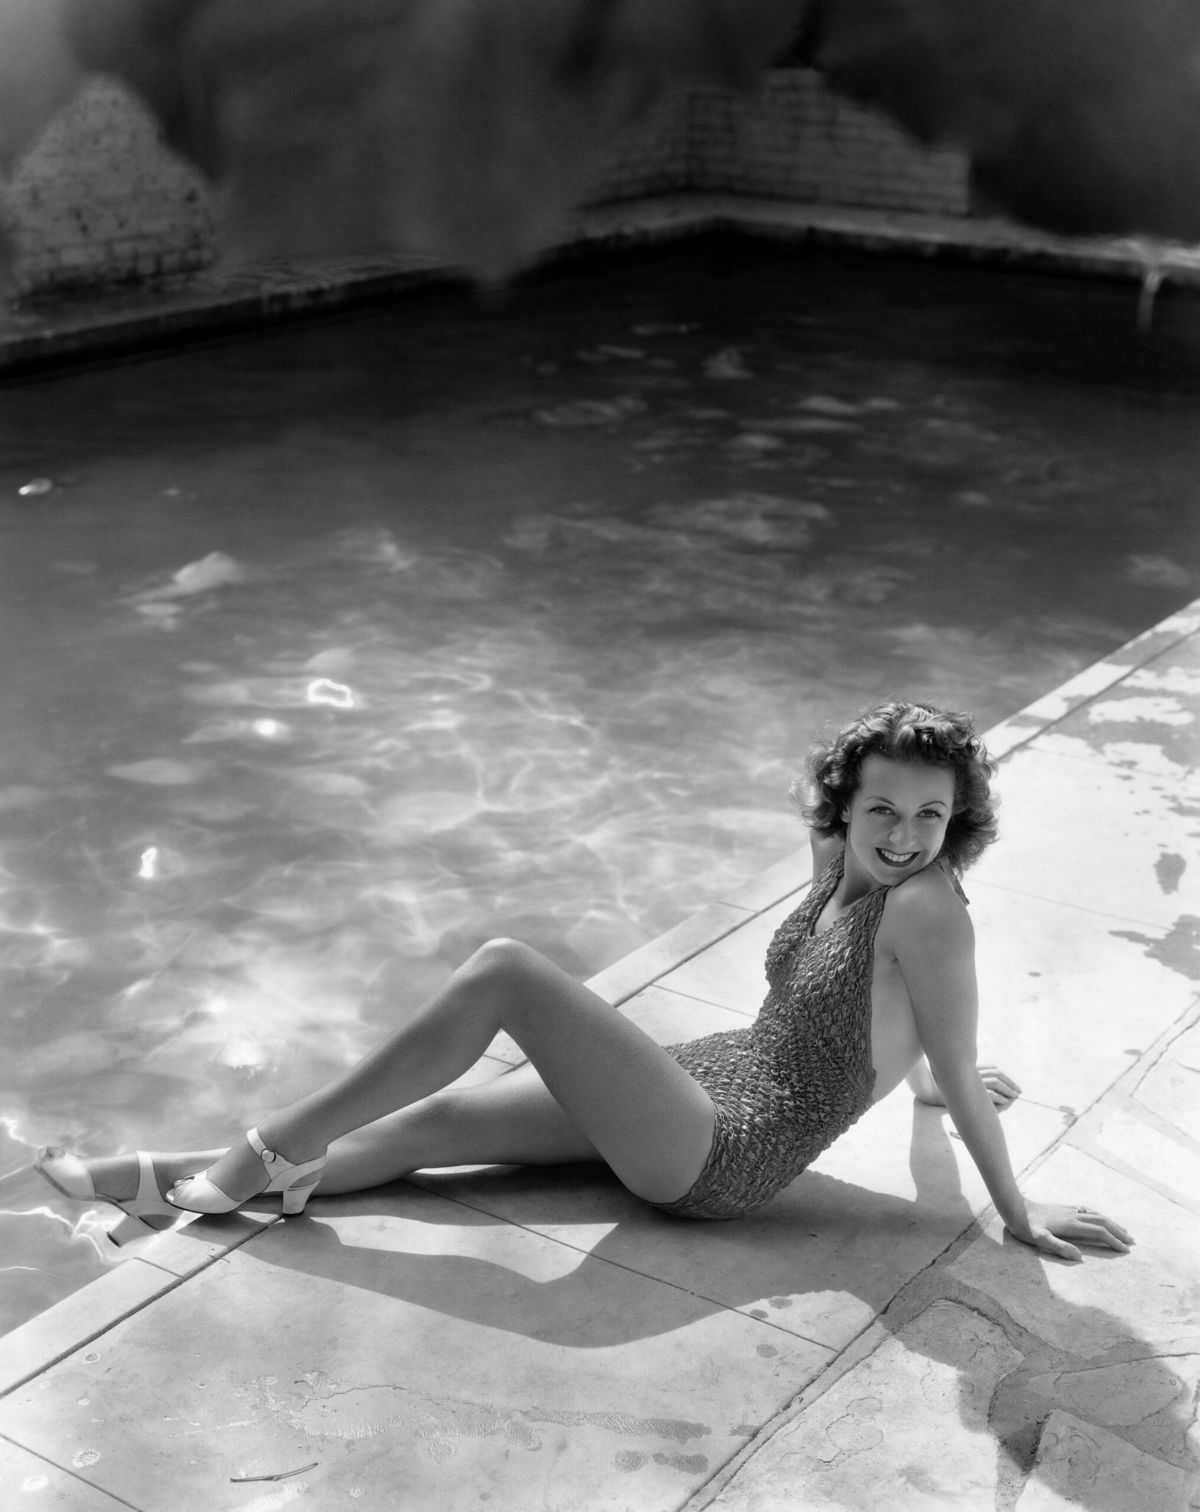 <i>John Springer Collection/Corbis Historical/Getty Images</i><br/>The pool is said to have once belonged to French actress Danielle Darrieux